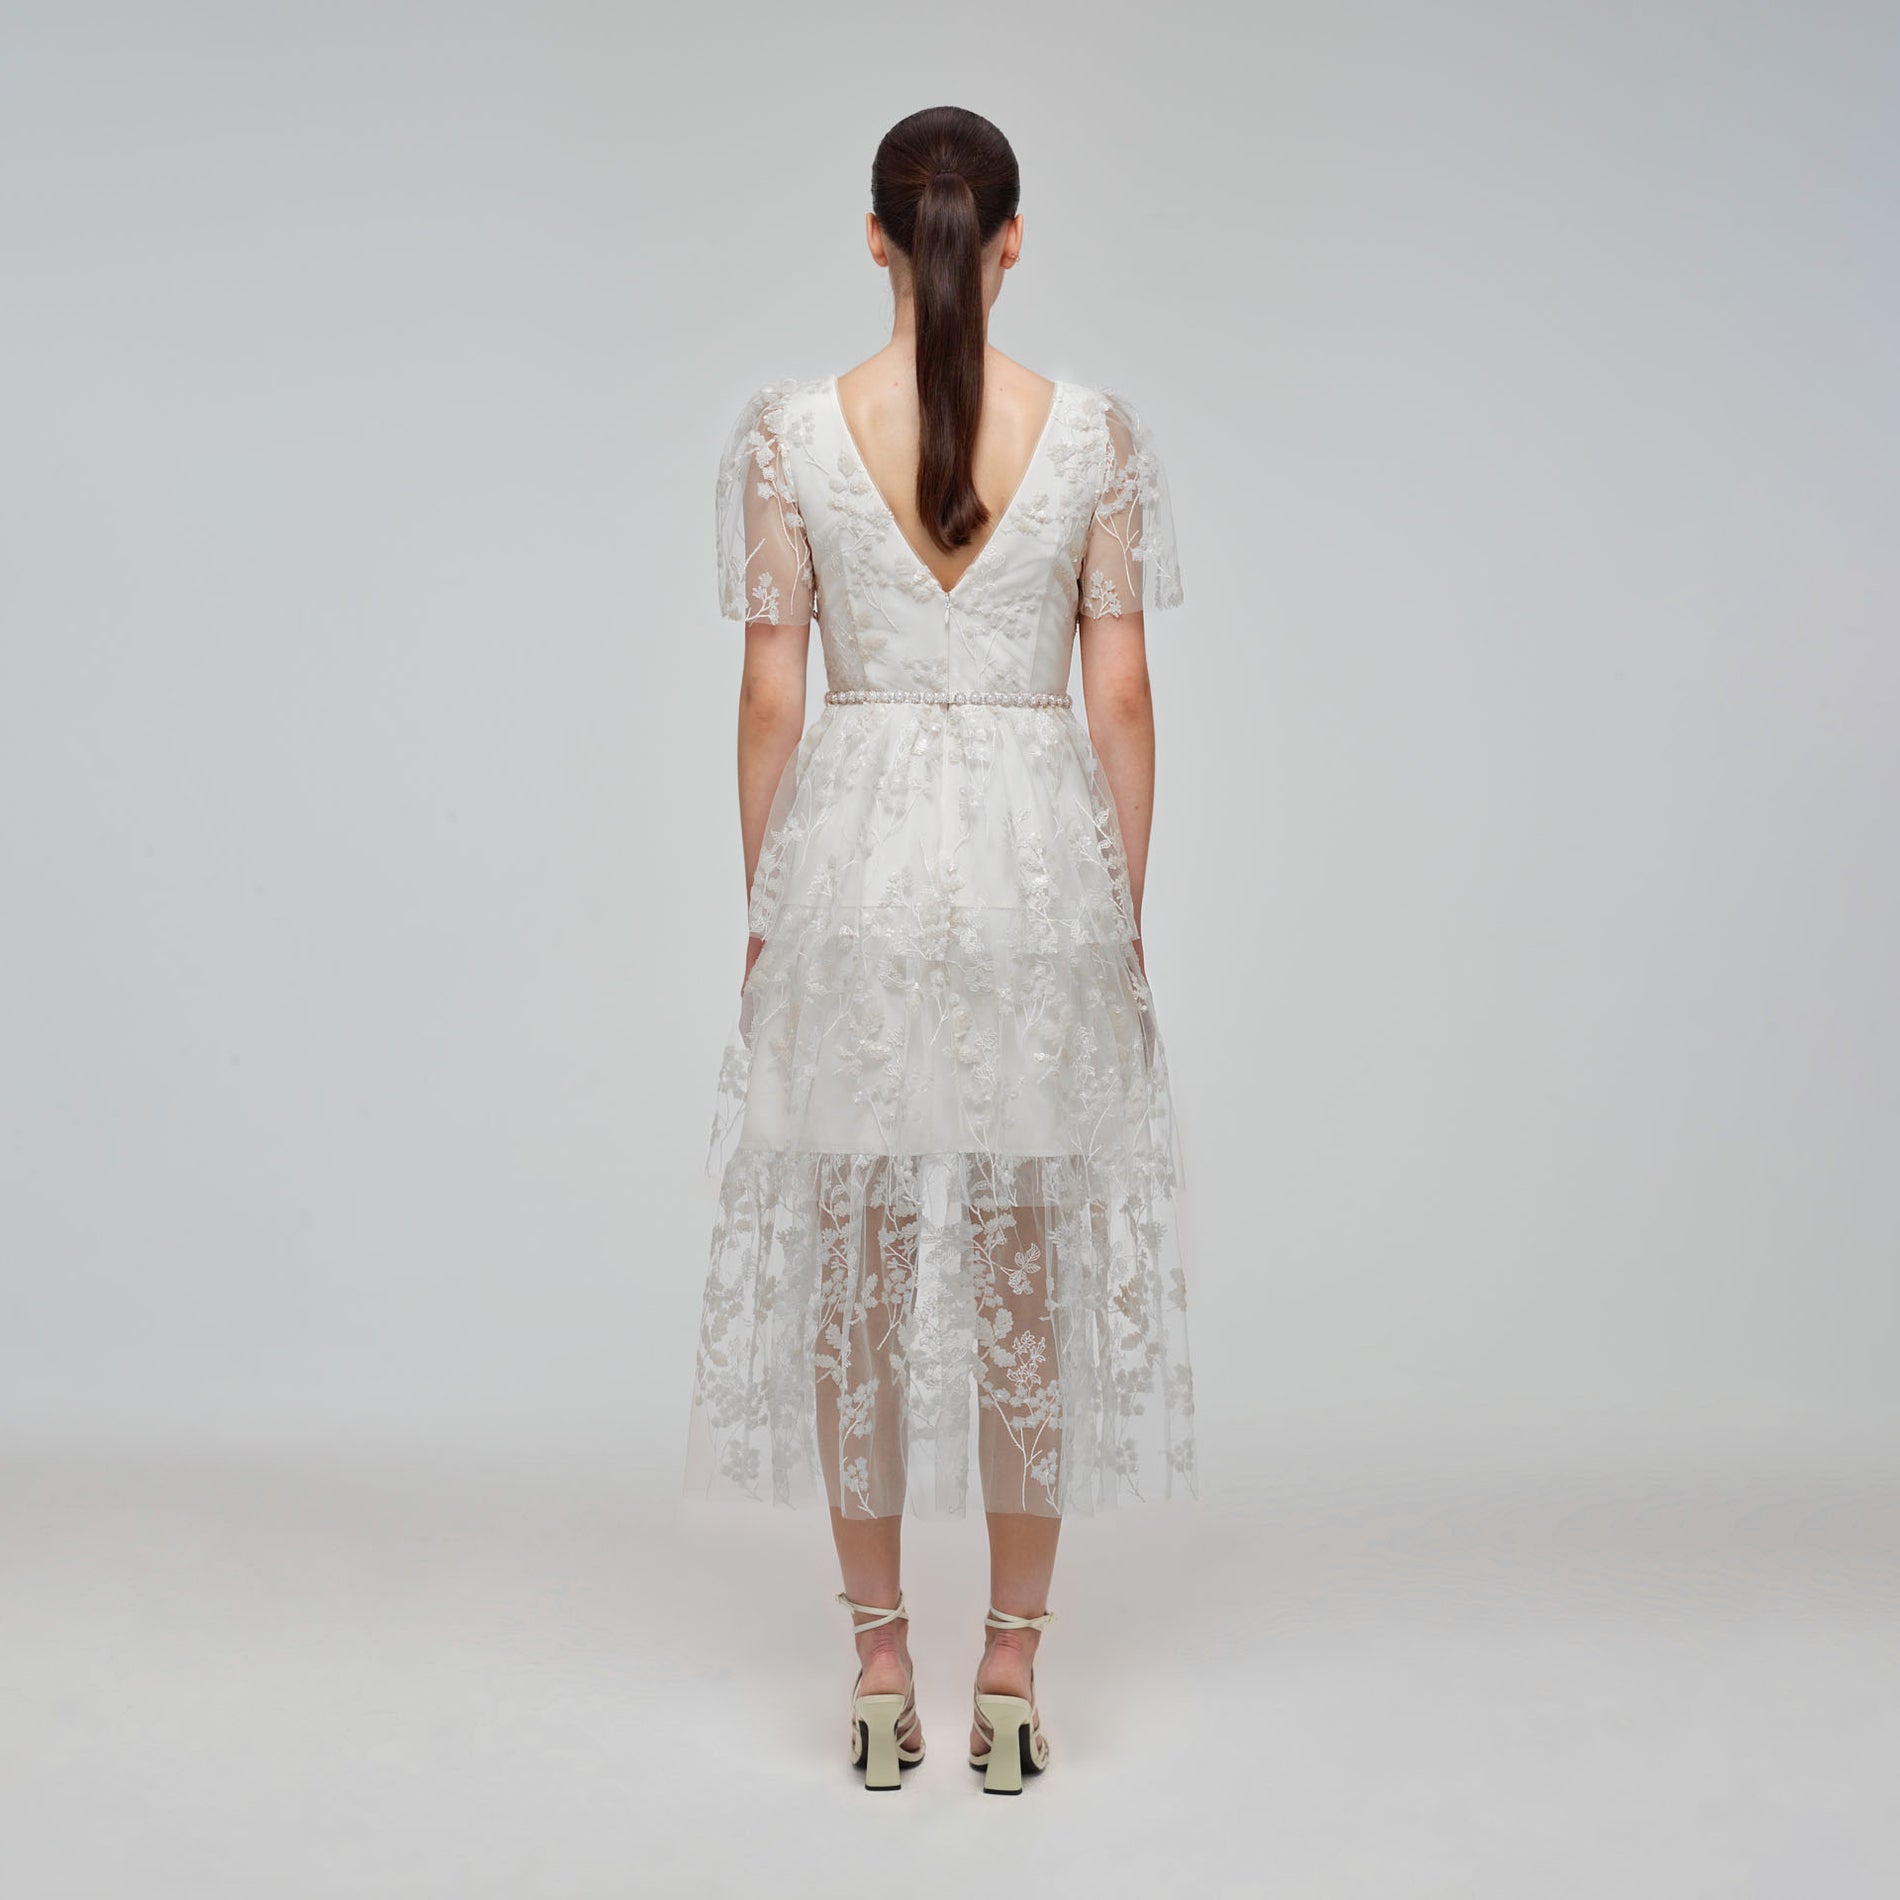 A woman wearing the Ivory Blossom Sequin Two Tier Midi Dress